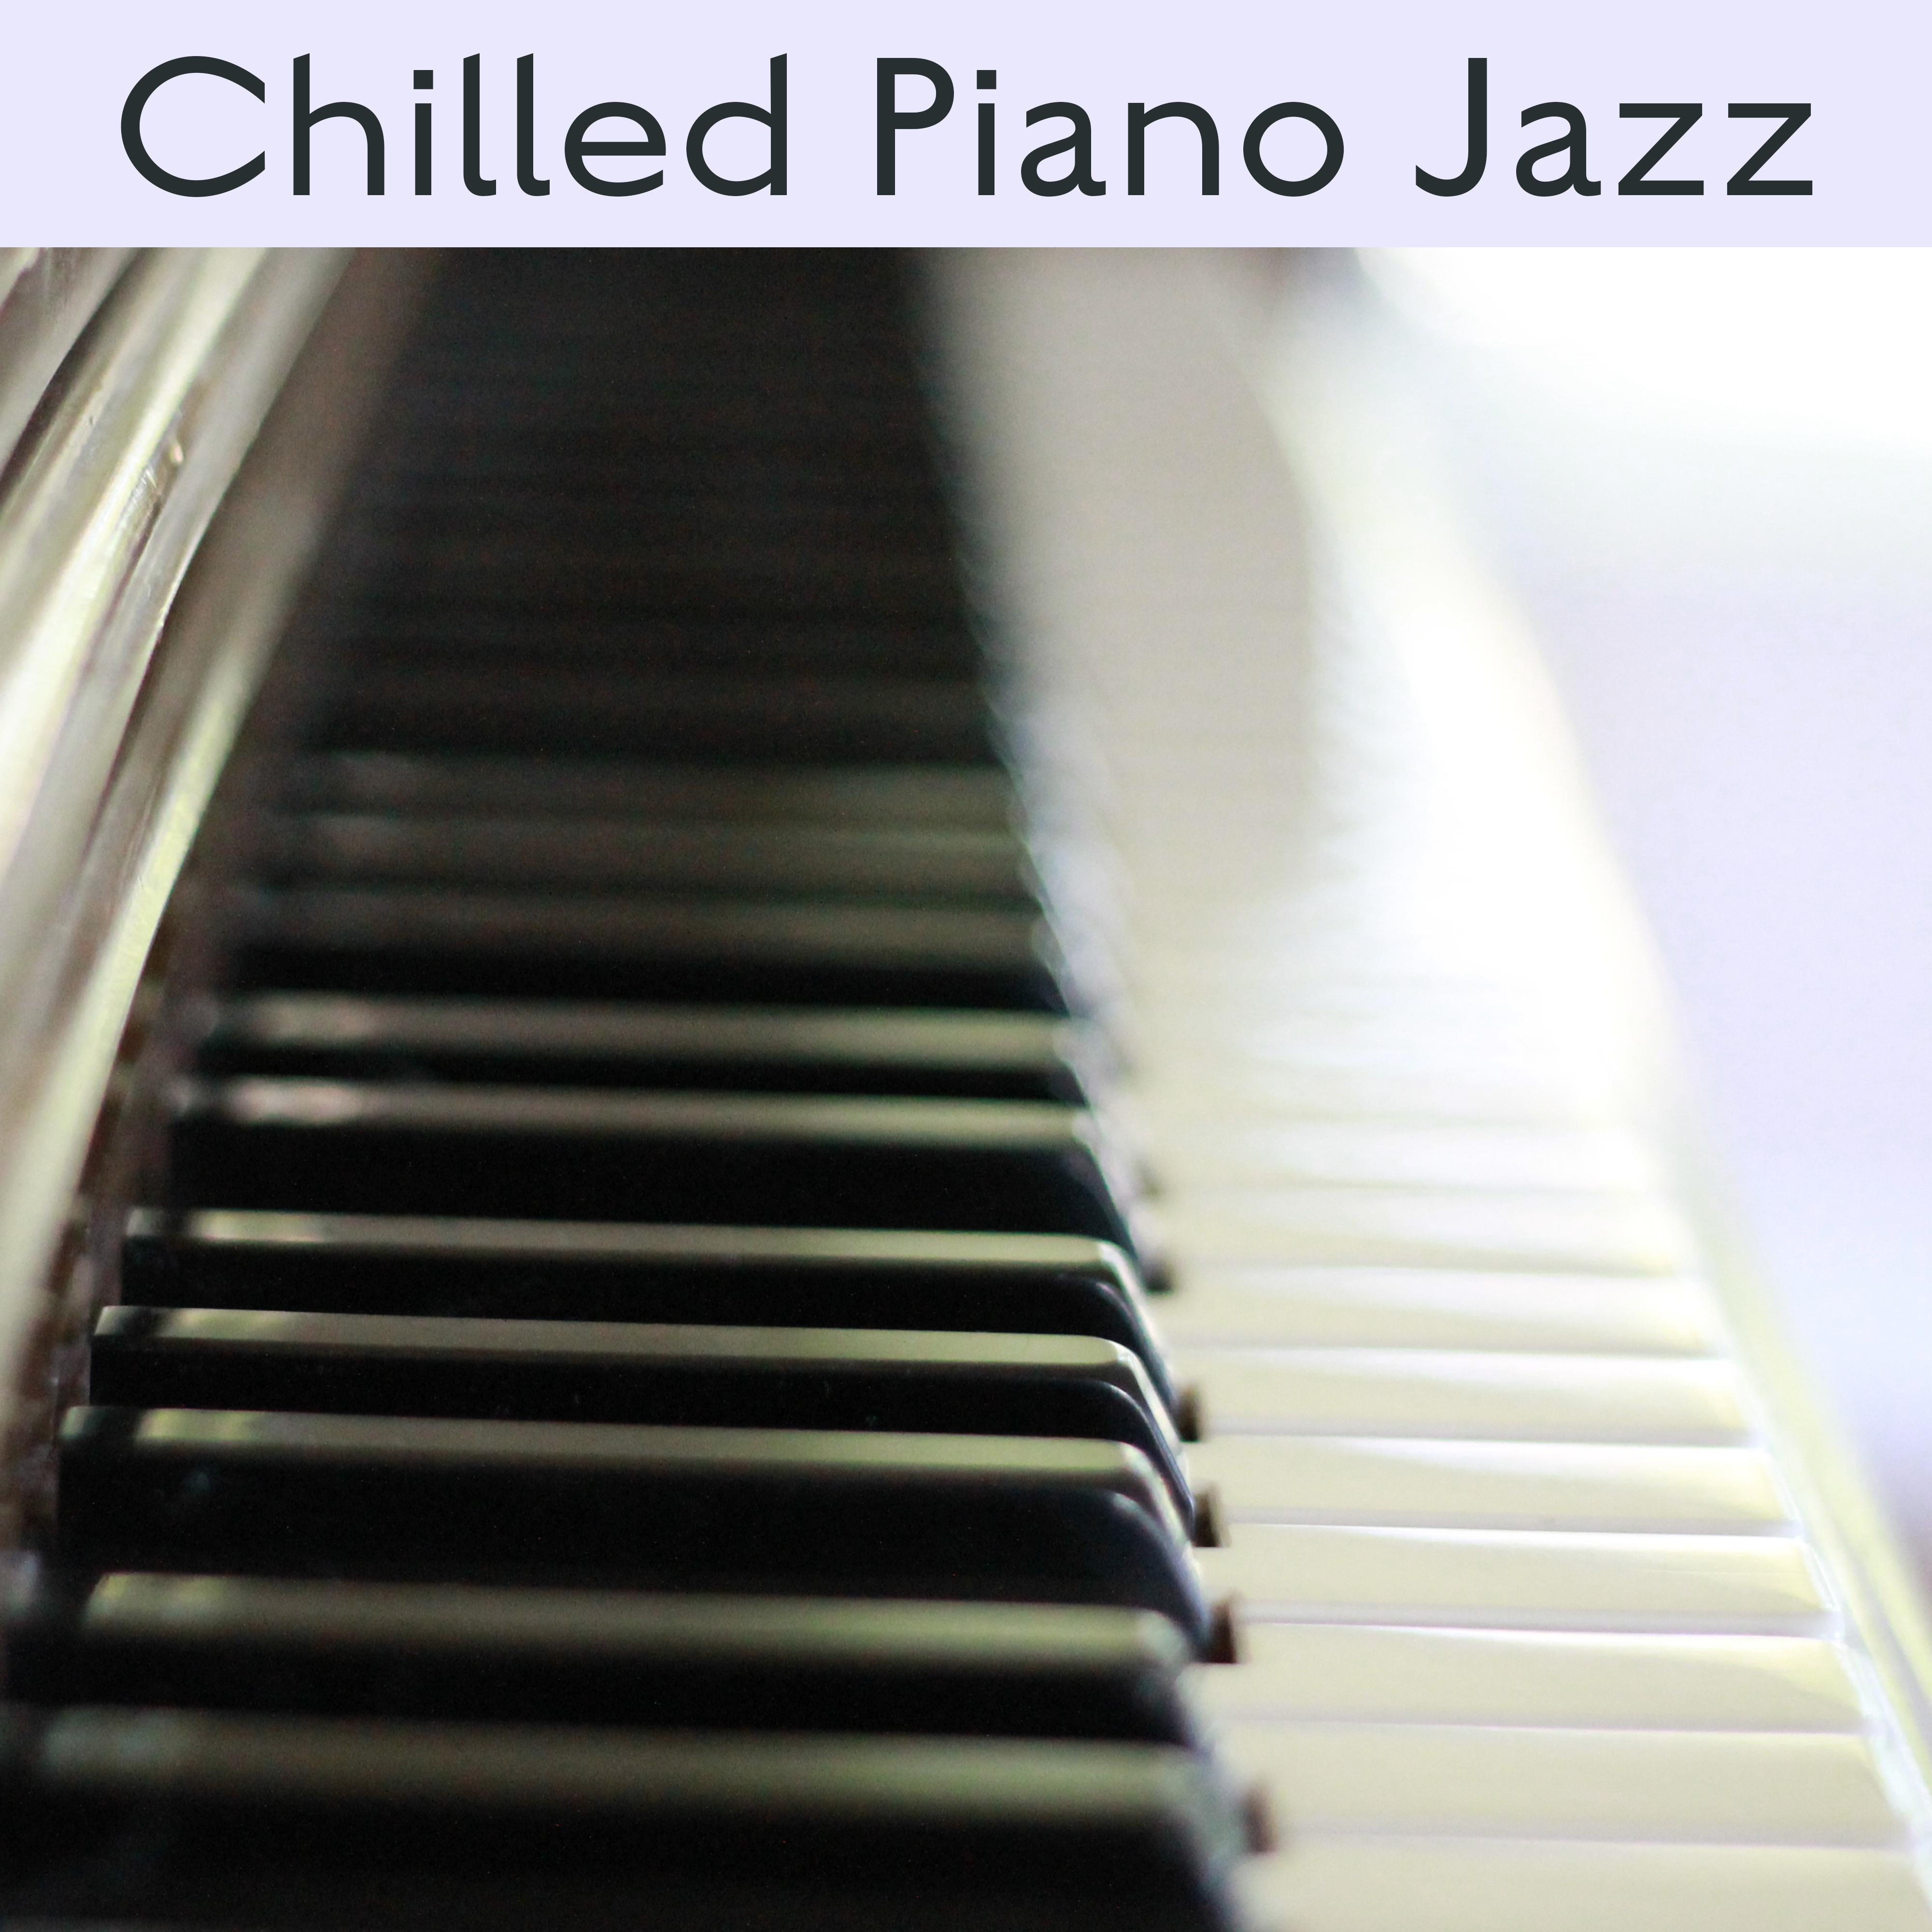 Chilled Piano Jazz – Rest & Relax, Piano Relaxation, Jazz to Calm Down, Soft Music